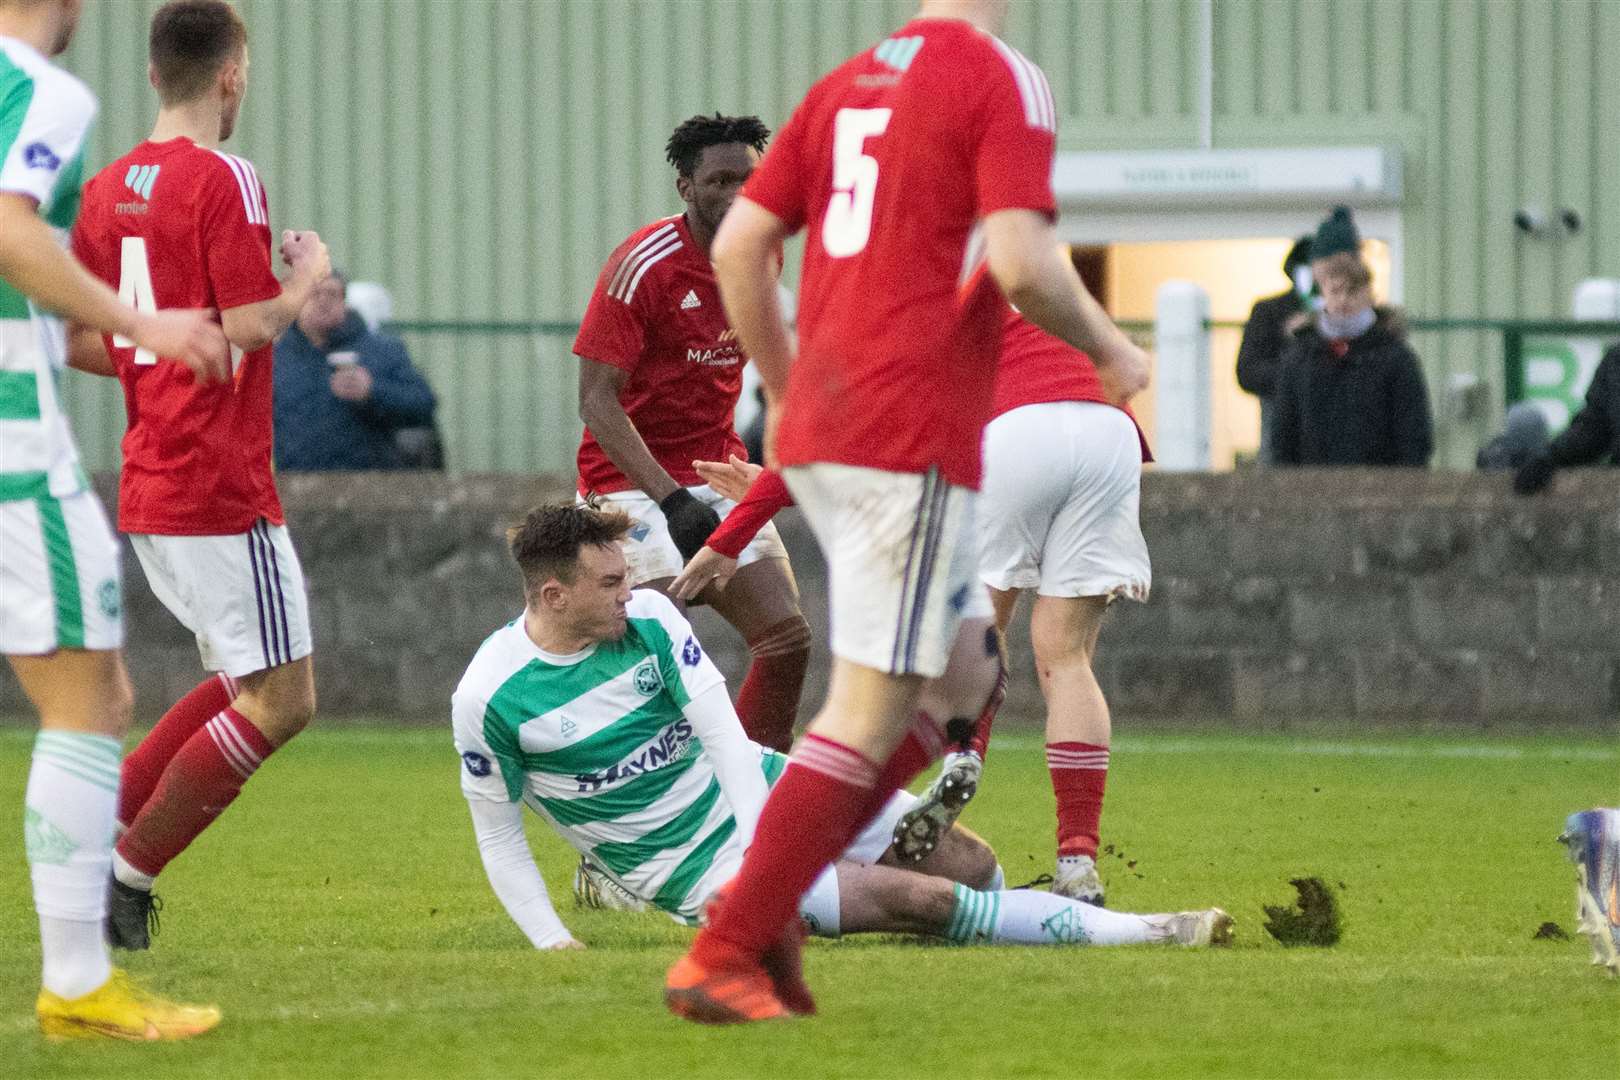 Buckie centre back Jack Murray is sent off for this challenge...Buckie Thistle FC (3) vs Deveronvale FC (2) - Highland Football League 22/23 - Victoria Park, Buckie 03/01/2023...Picture: Daniel Forsyth..